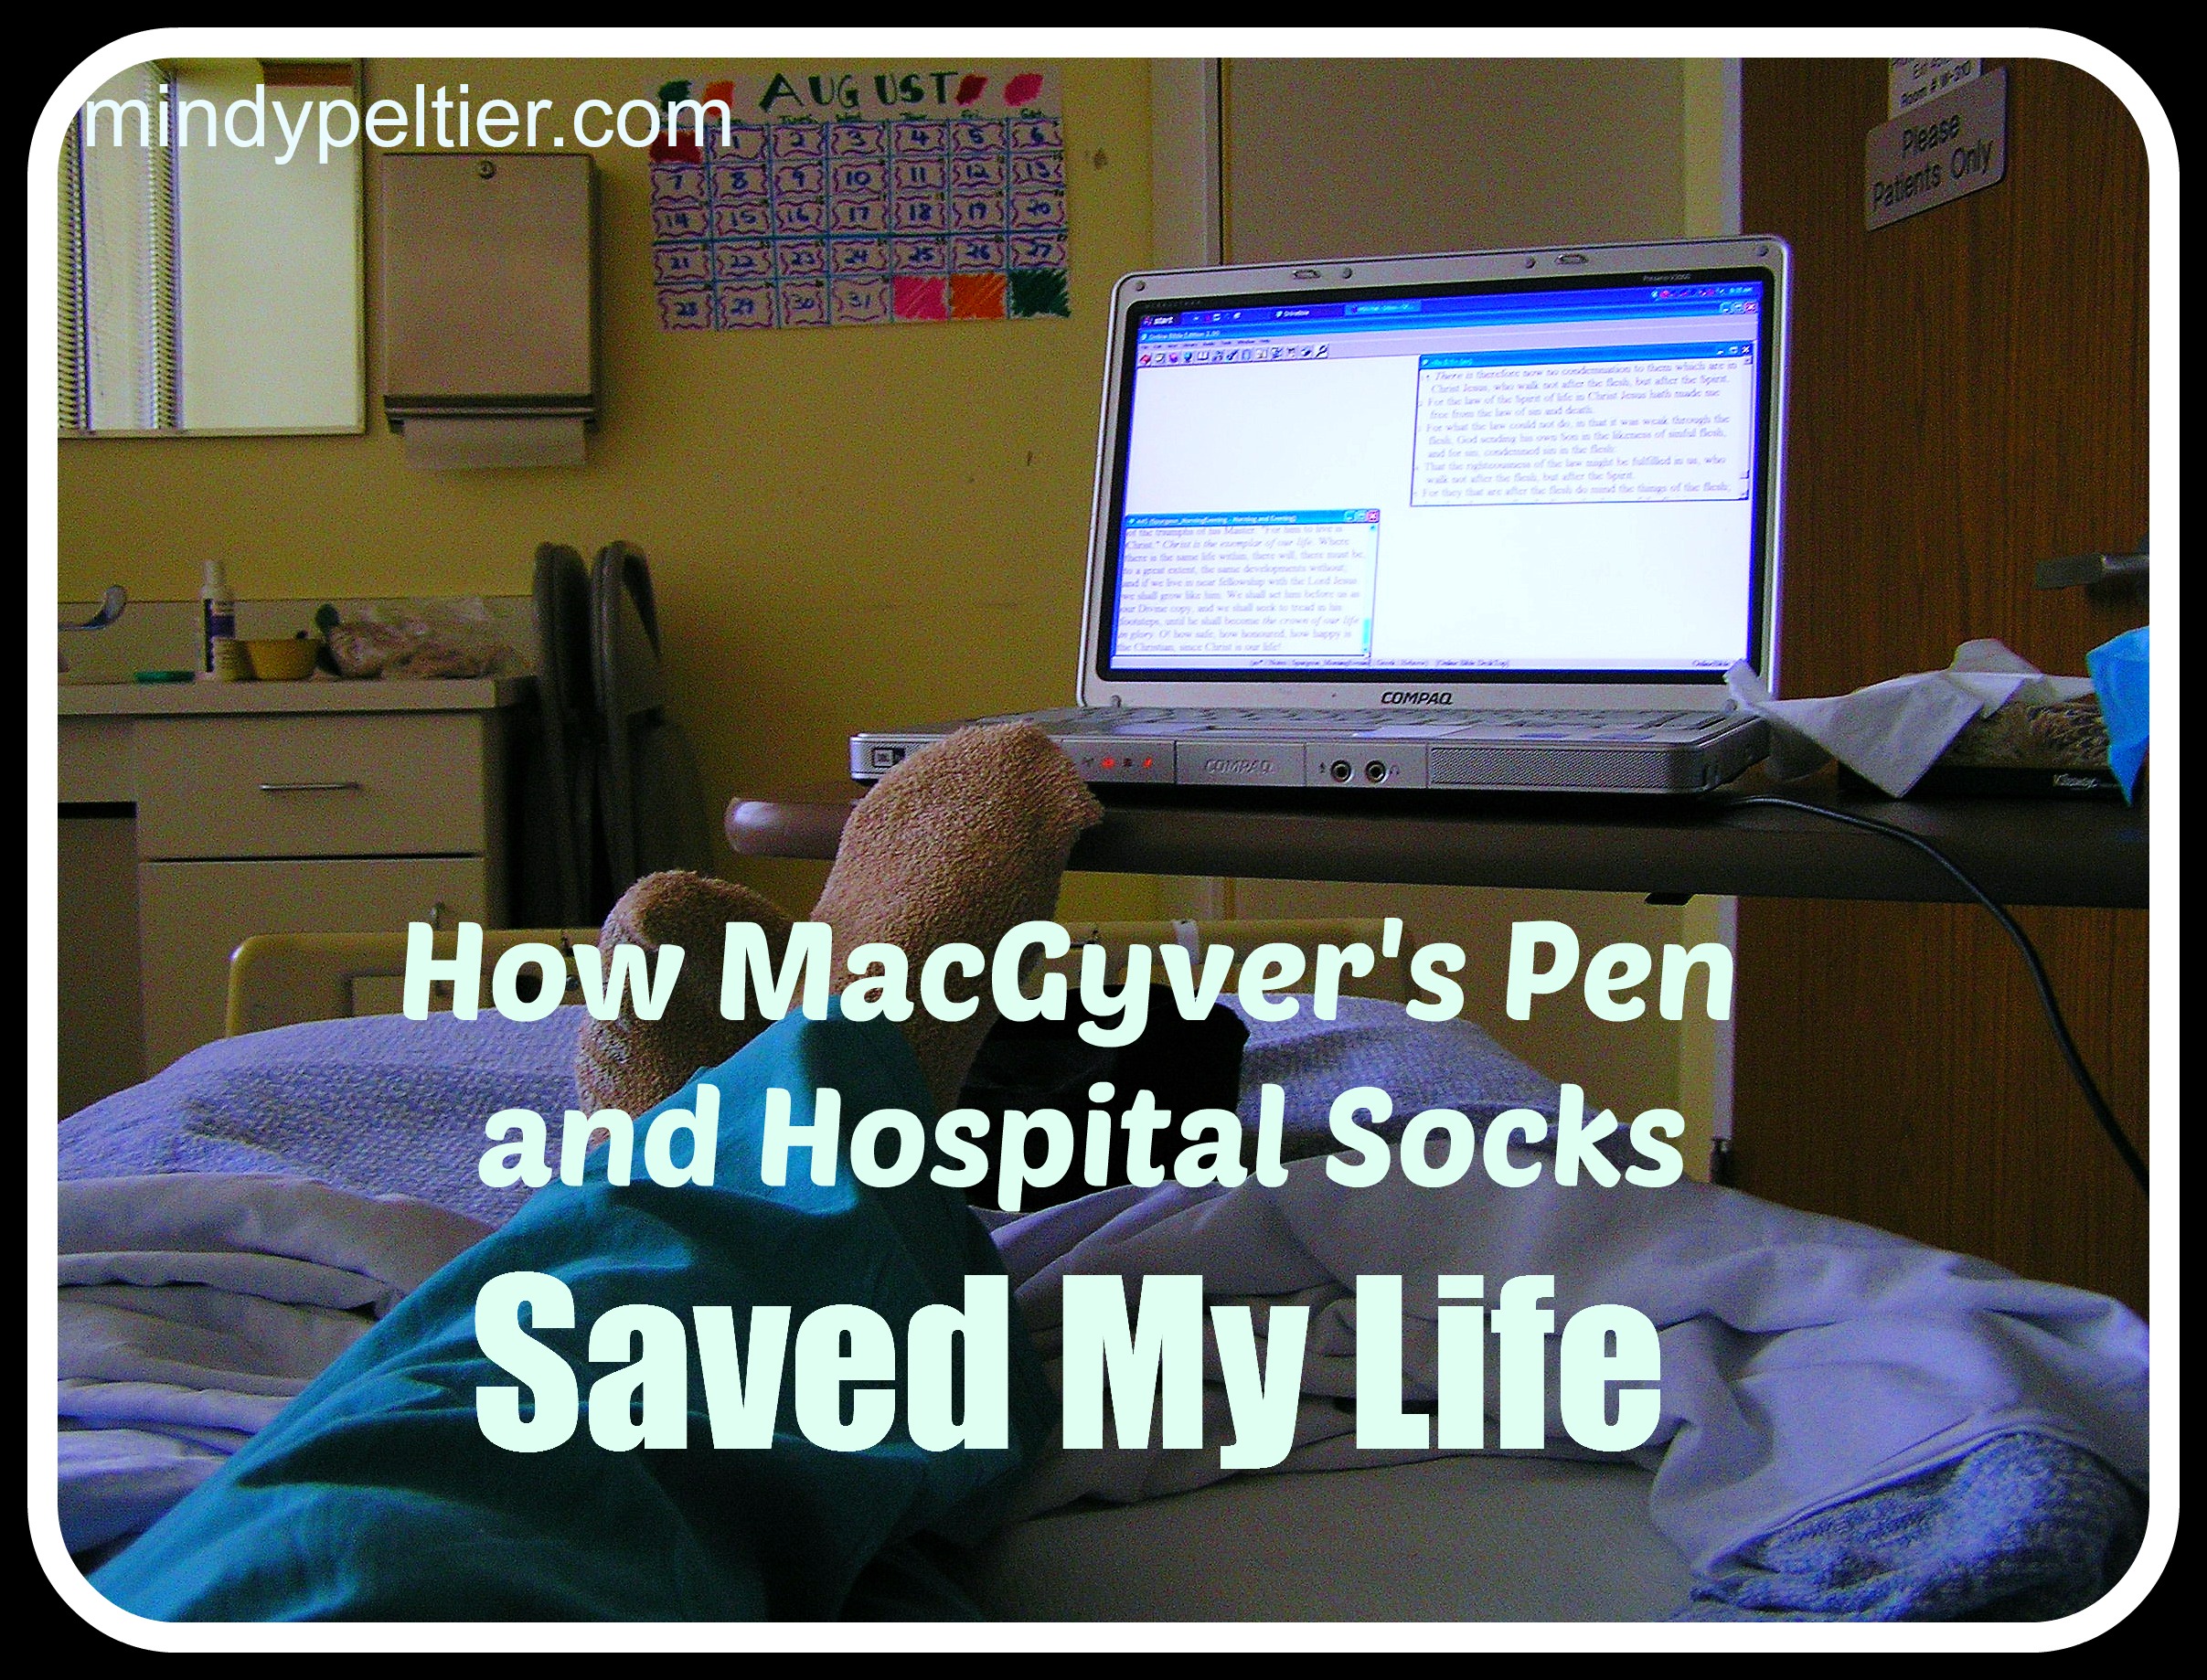 How MacGyver’s Pen and Hospital Socks Saved My Life